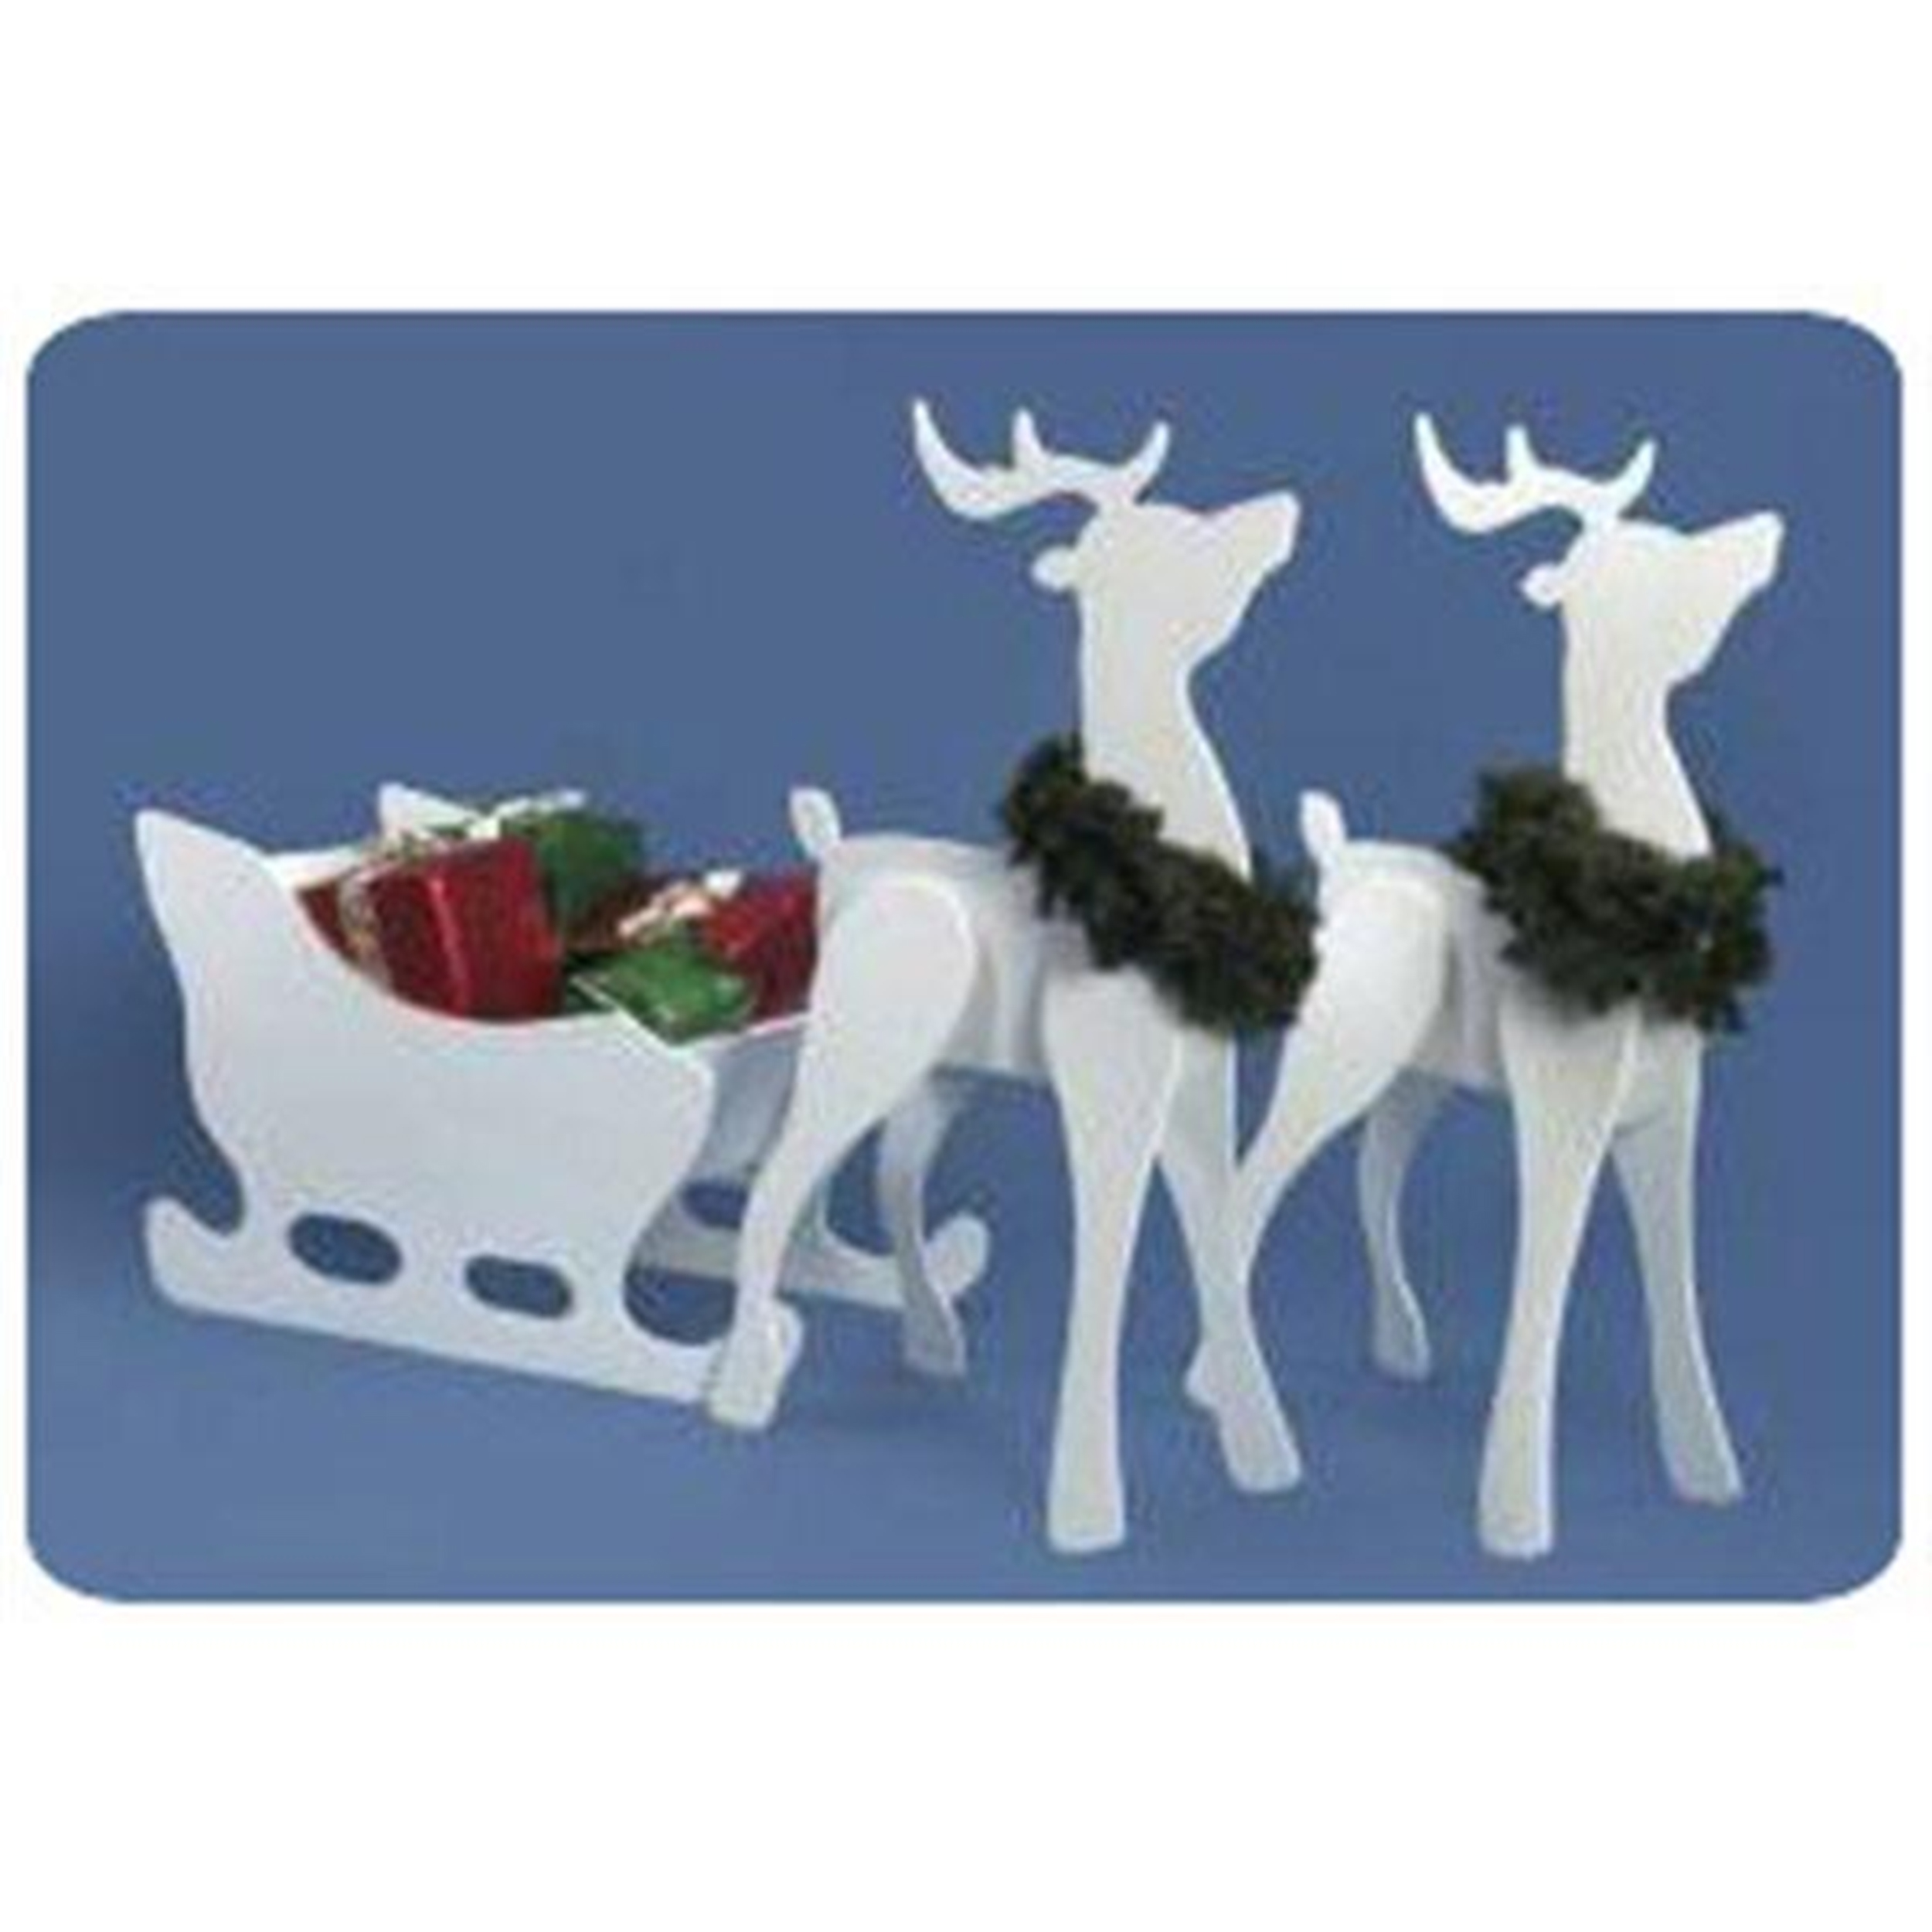 Woodworking Project Paper Plan To Build Proud Reindeer And Sleigh Combo